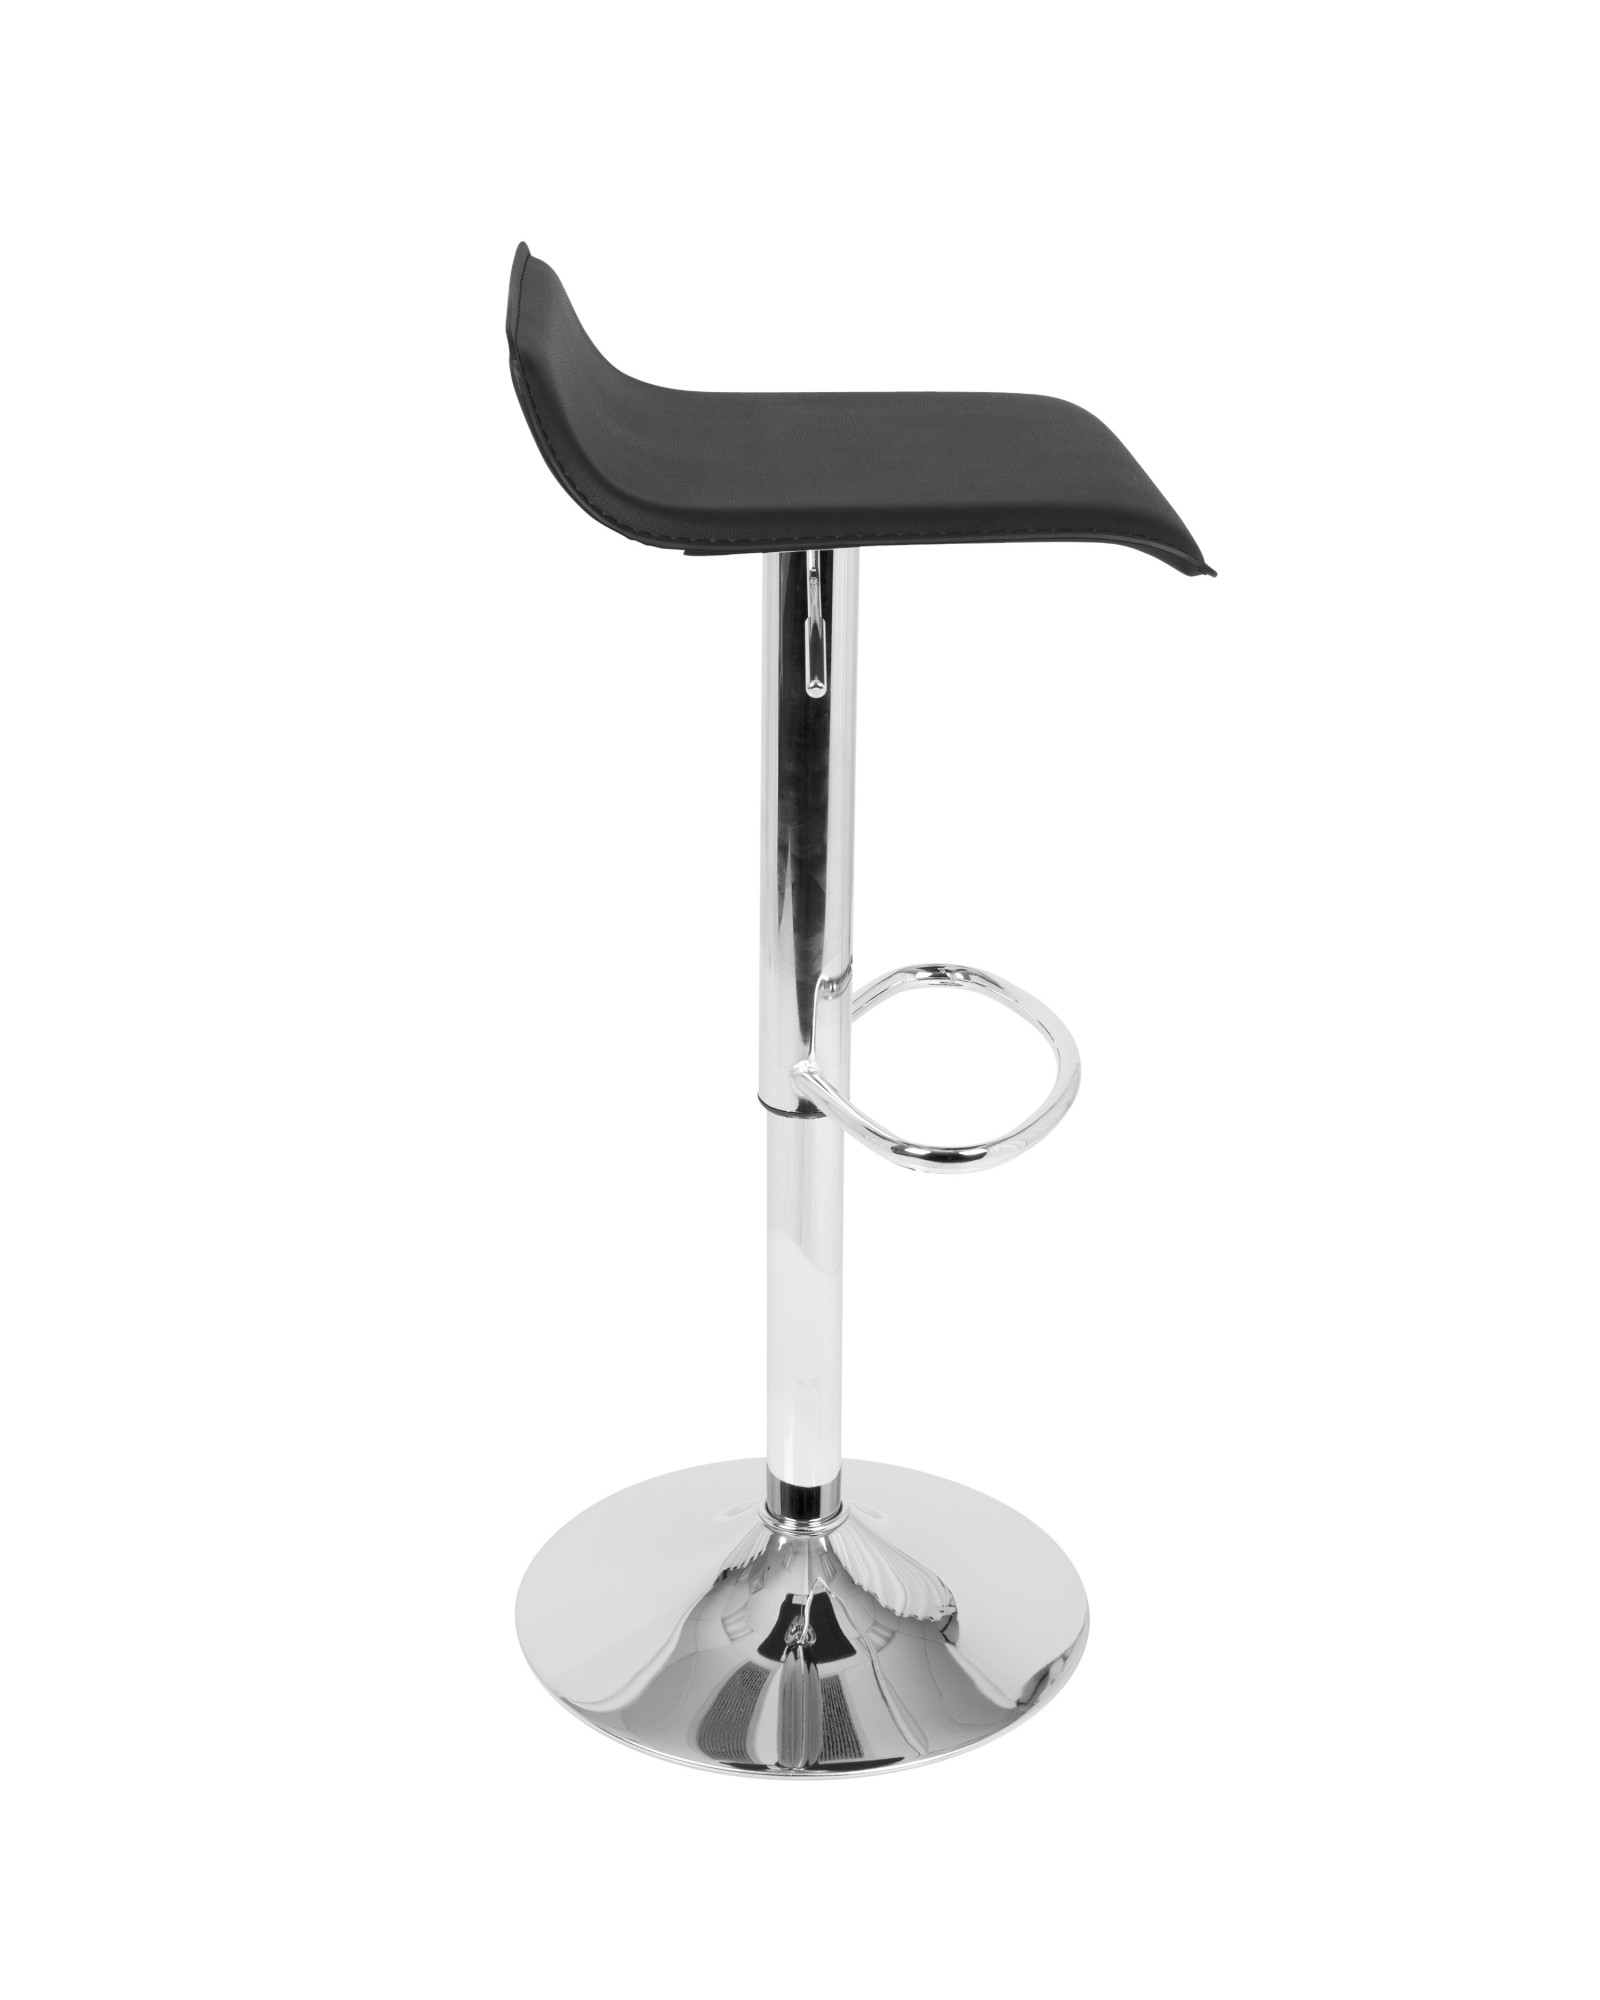 Ale Contemporary Adjustable Barstool in Black PU Leather - Set of 2